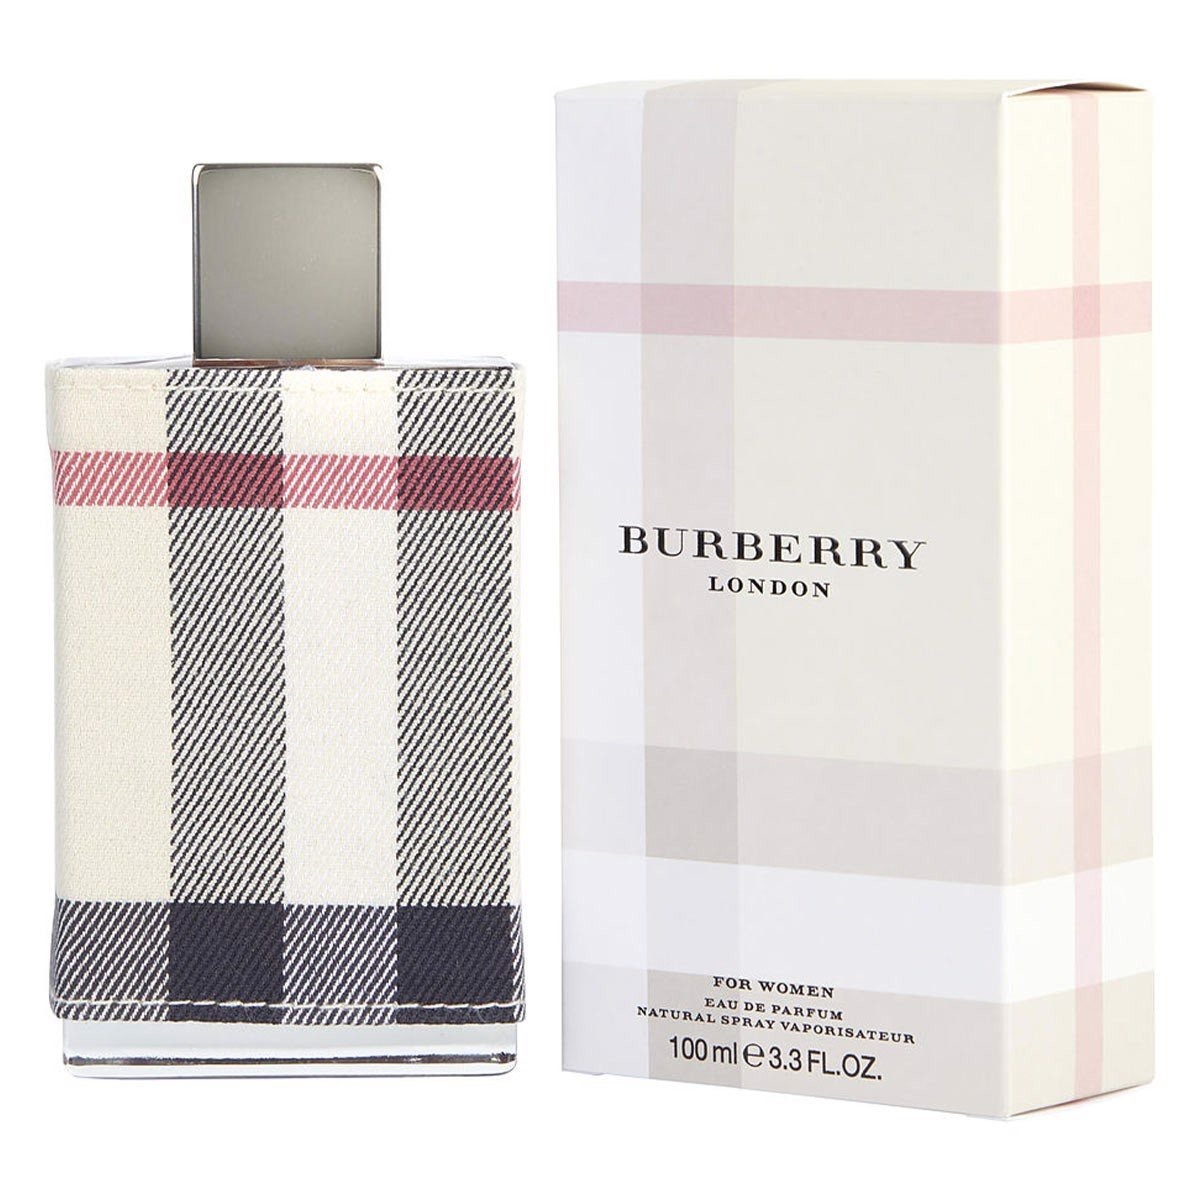 nuoc hoa nu burberry london for women review